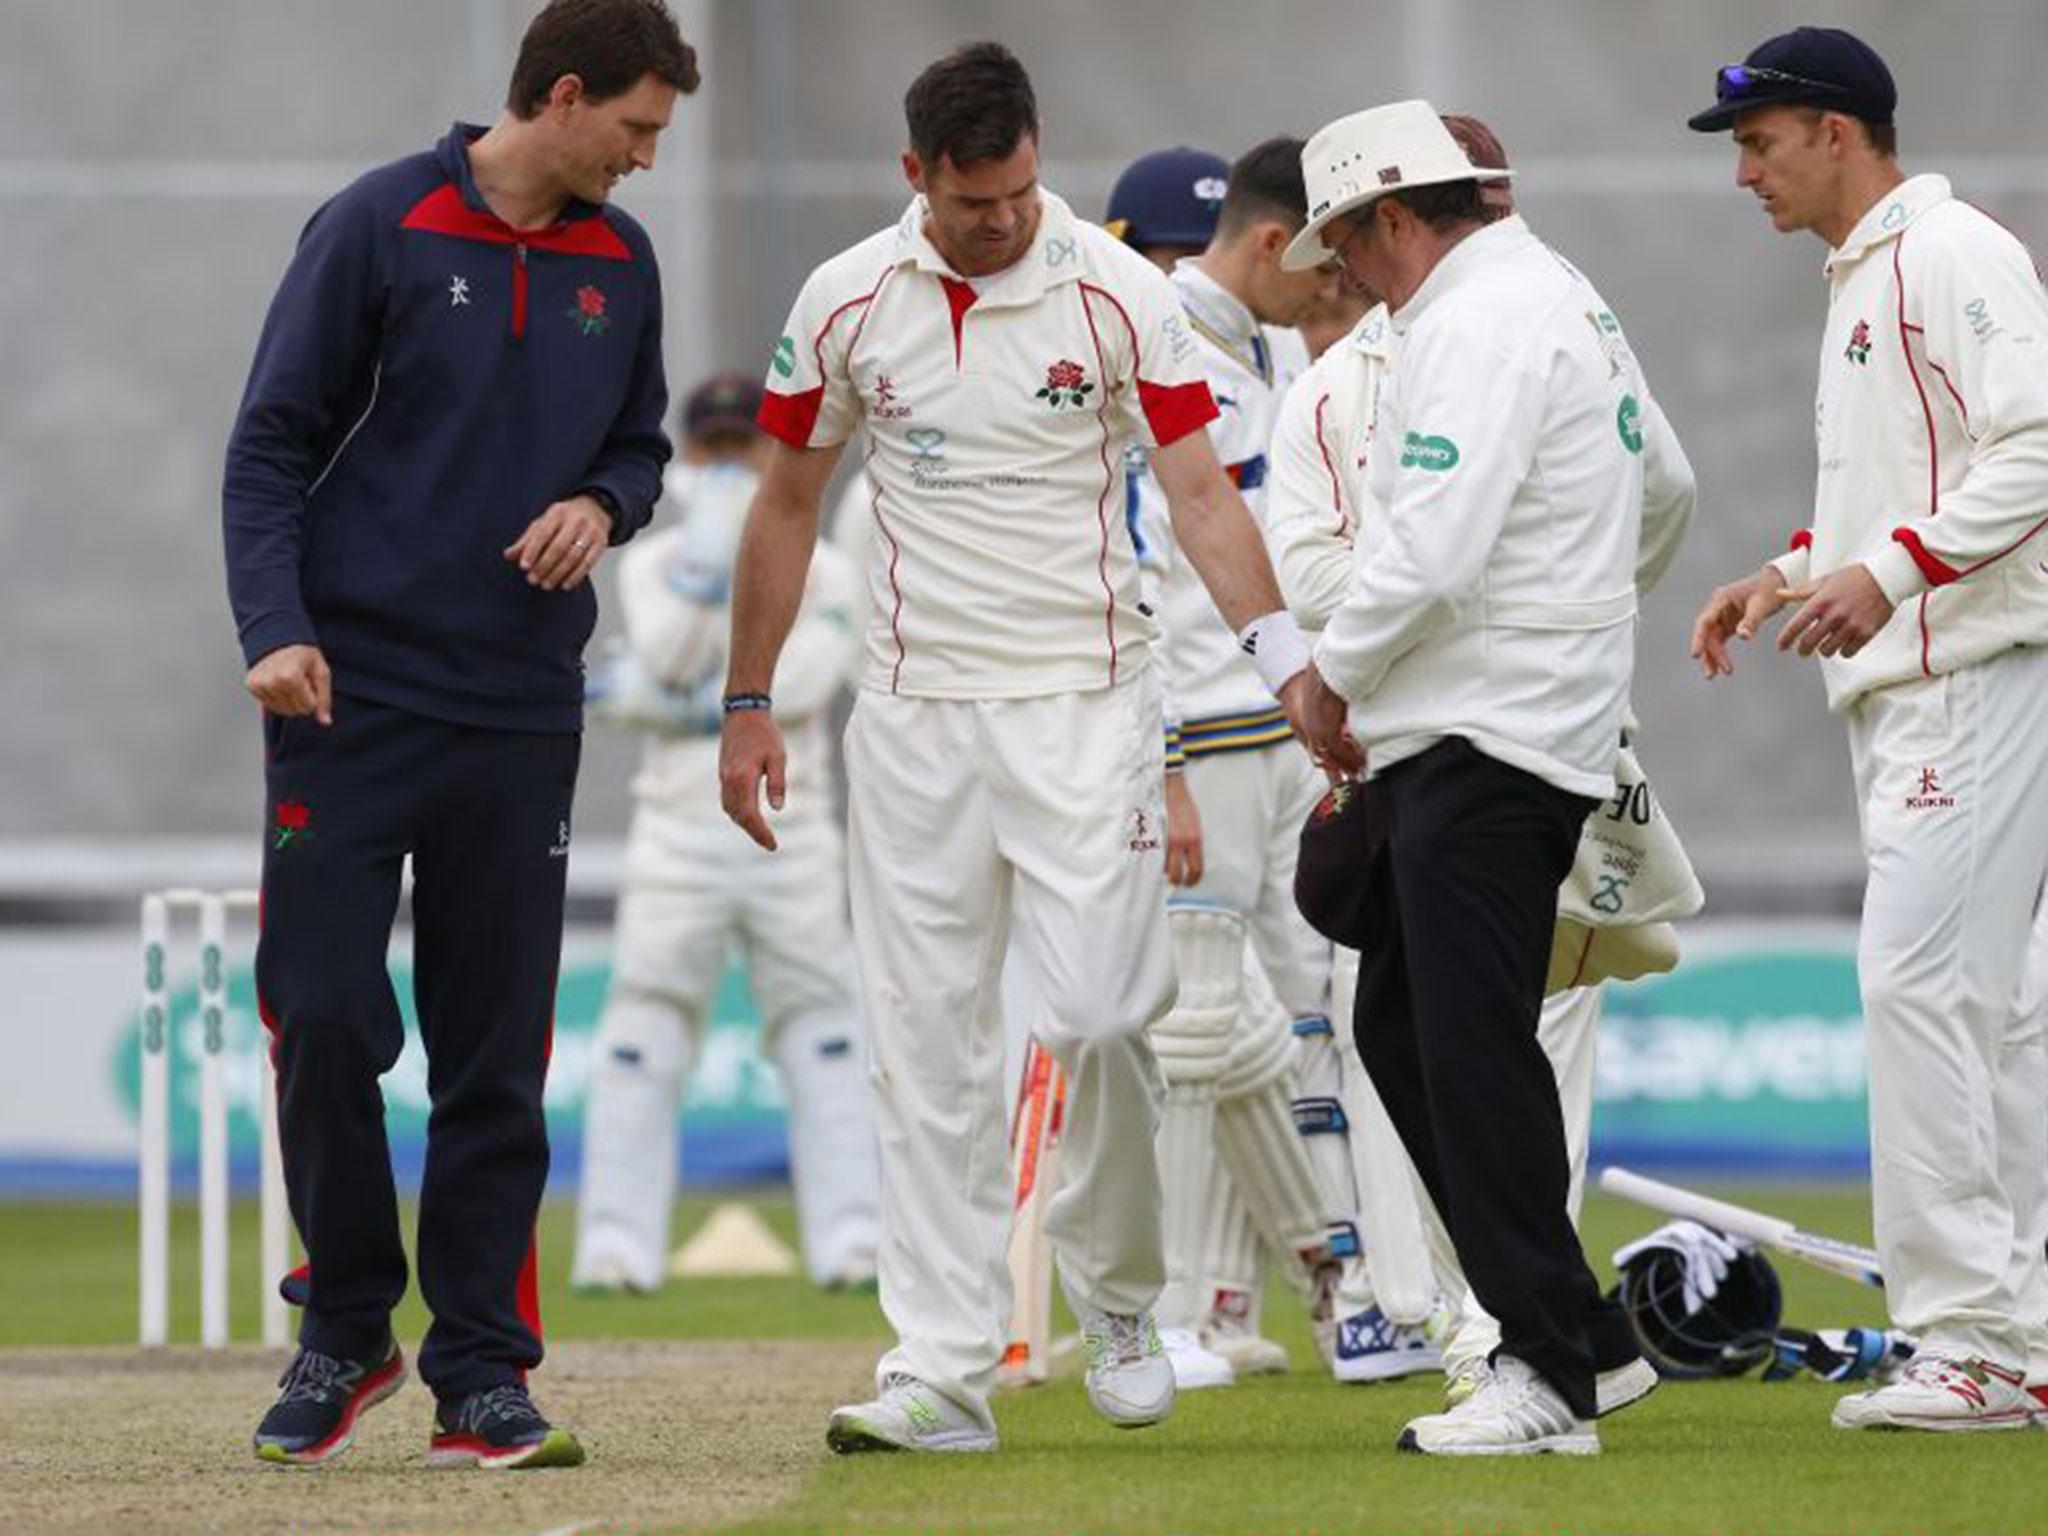 James Anderson was injured while playing for Lancashire last week